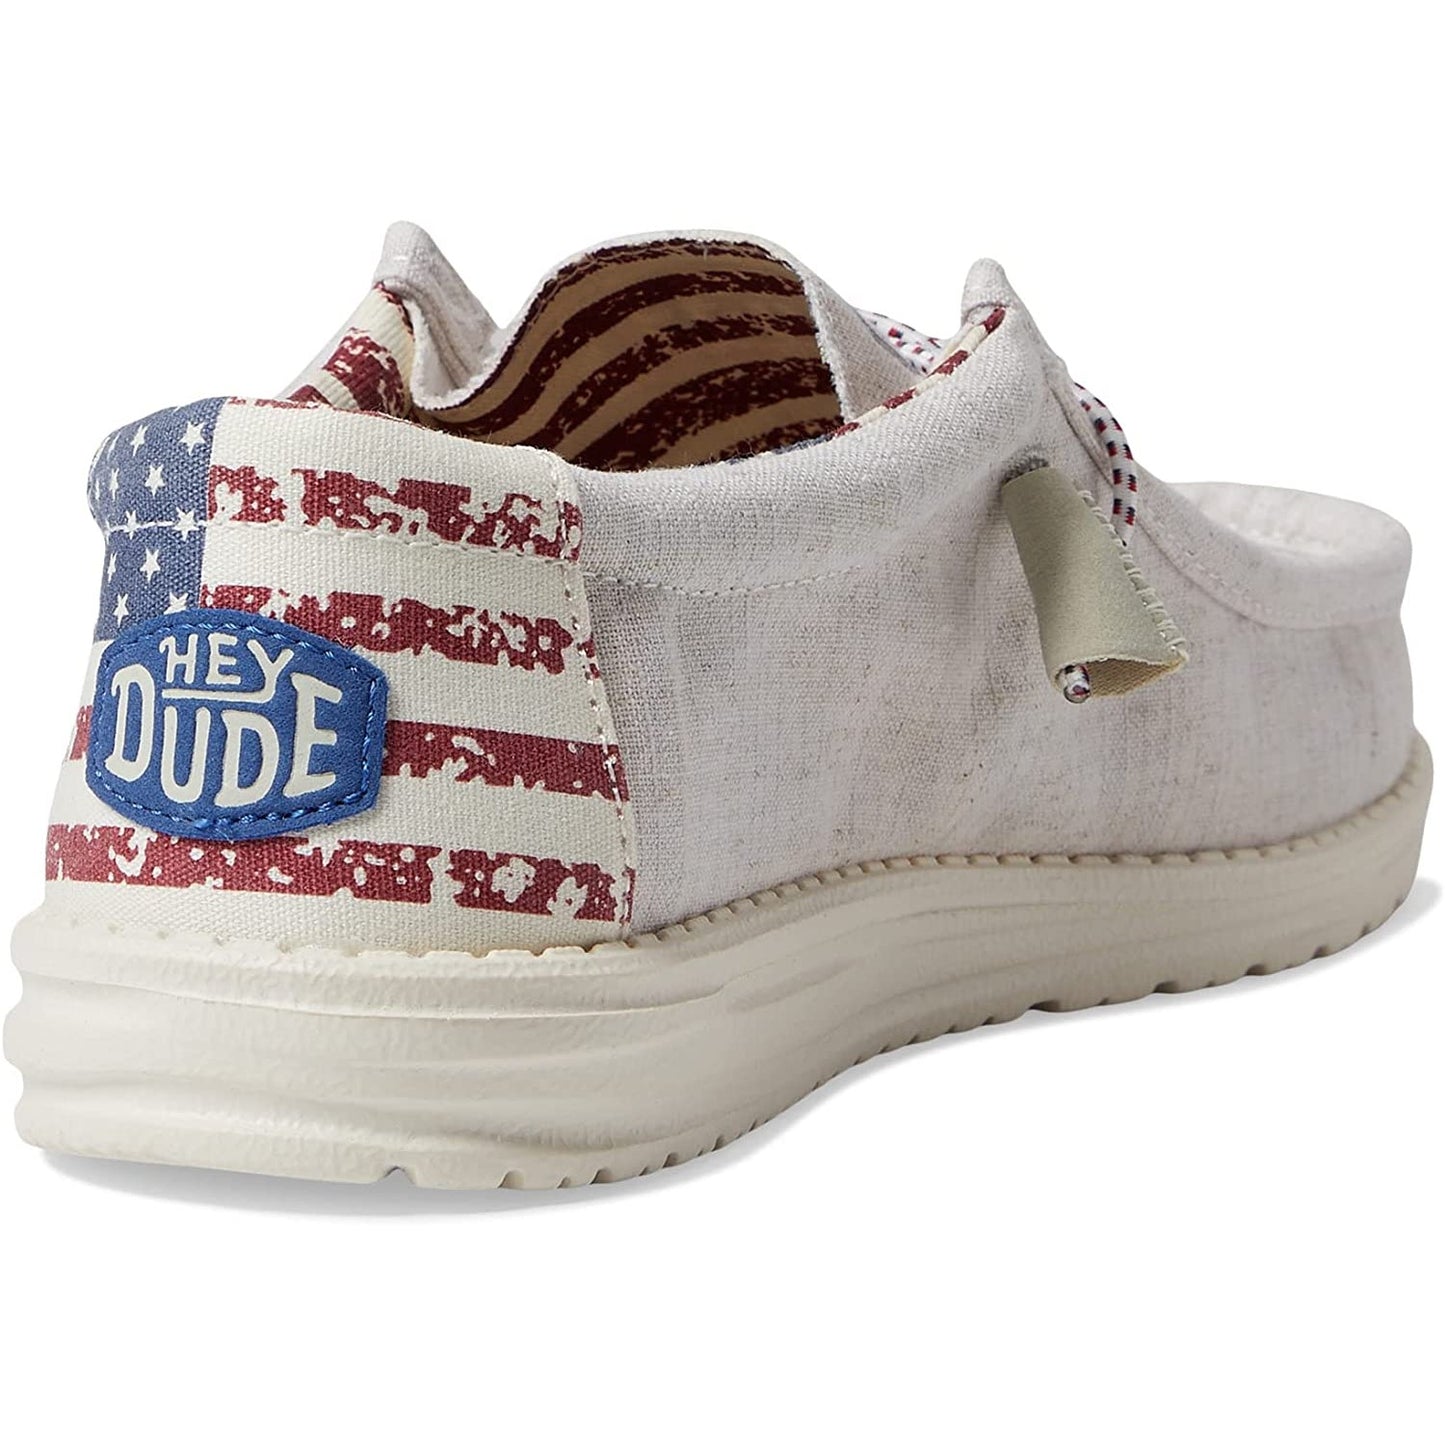 Hey Dude Men's Wally Off White Patriotic Casual Shoes 40001-1K1